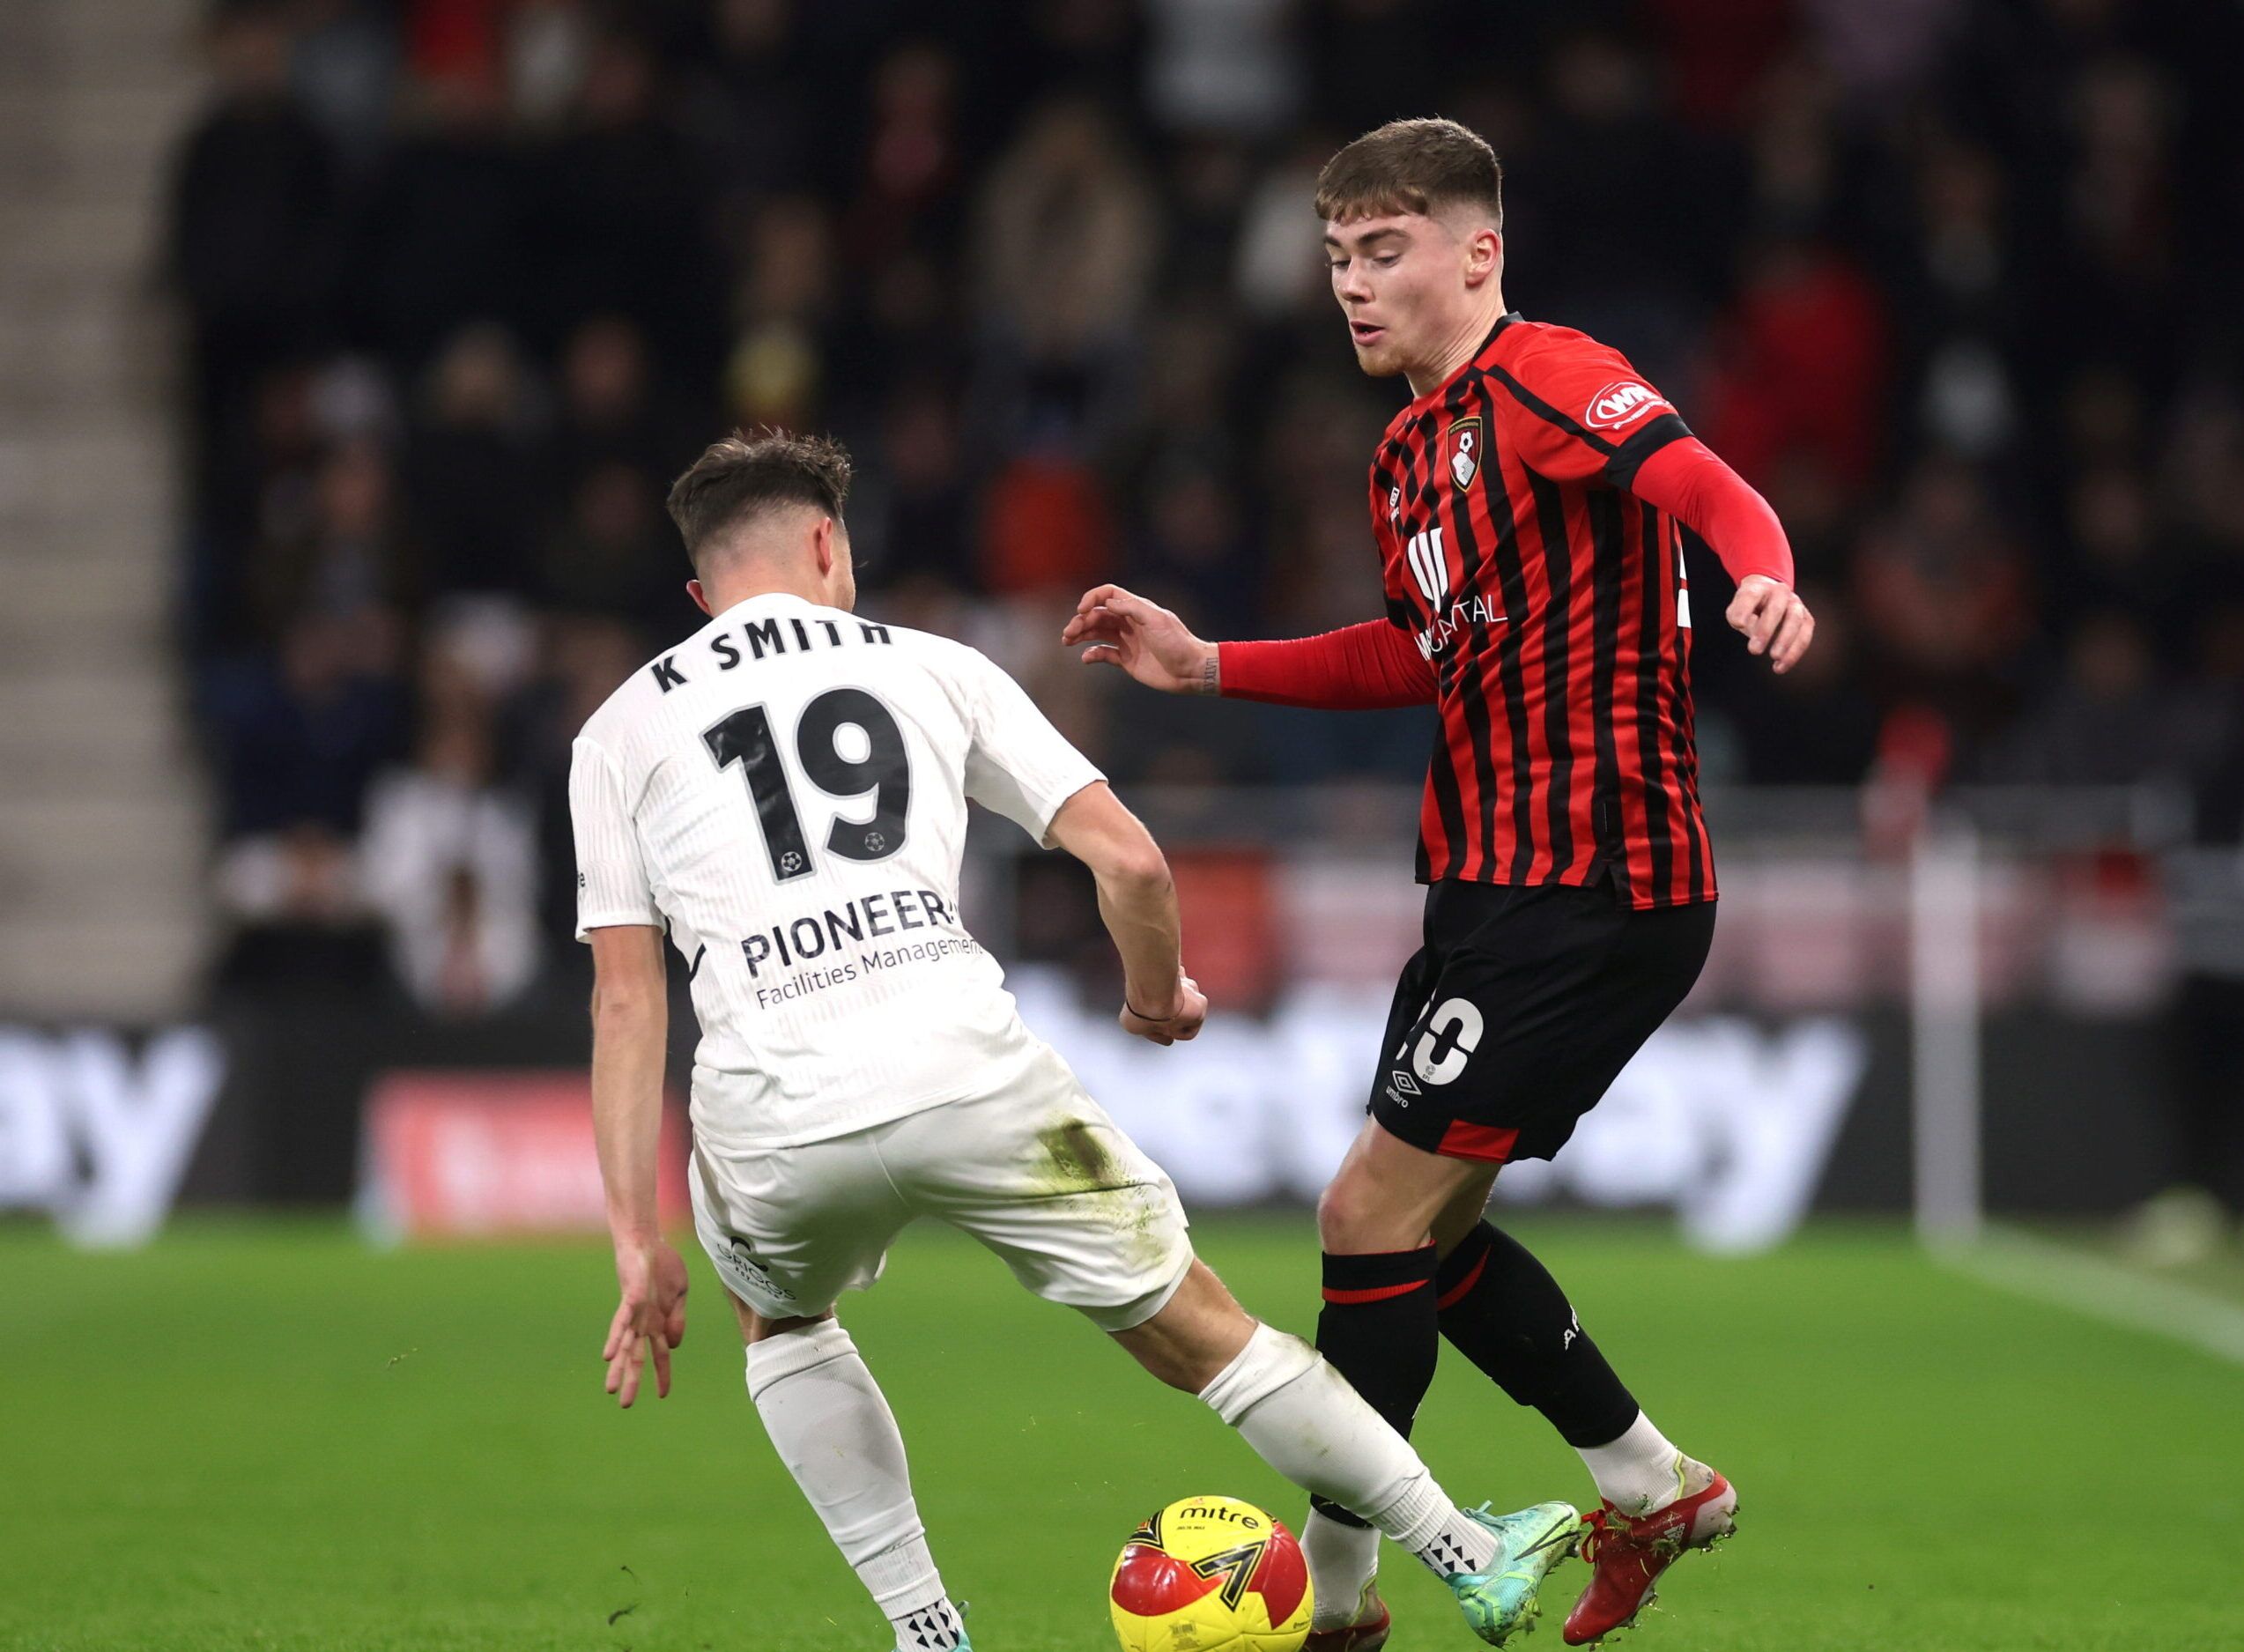 Soccer Football - FA Cup - Fourth Round - AFC Bournemouth v Boreham Wood - Vitality Stadium, Bournemouth, Britain - February 6, 2022 Boreham Wood's Kane Smith in action with Bournemouth's Leif Davis Action Images/Paul Childs